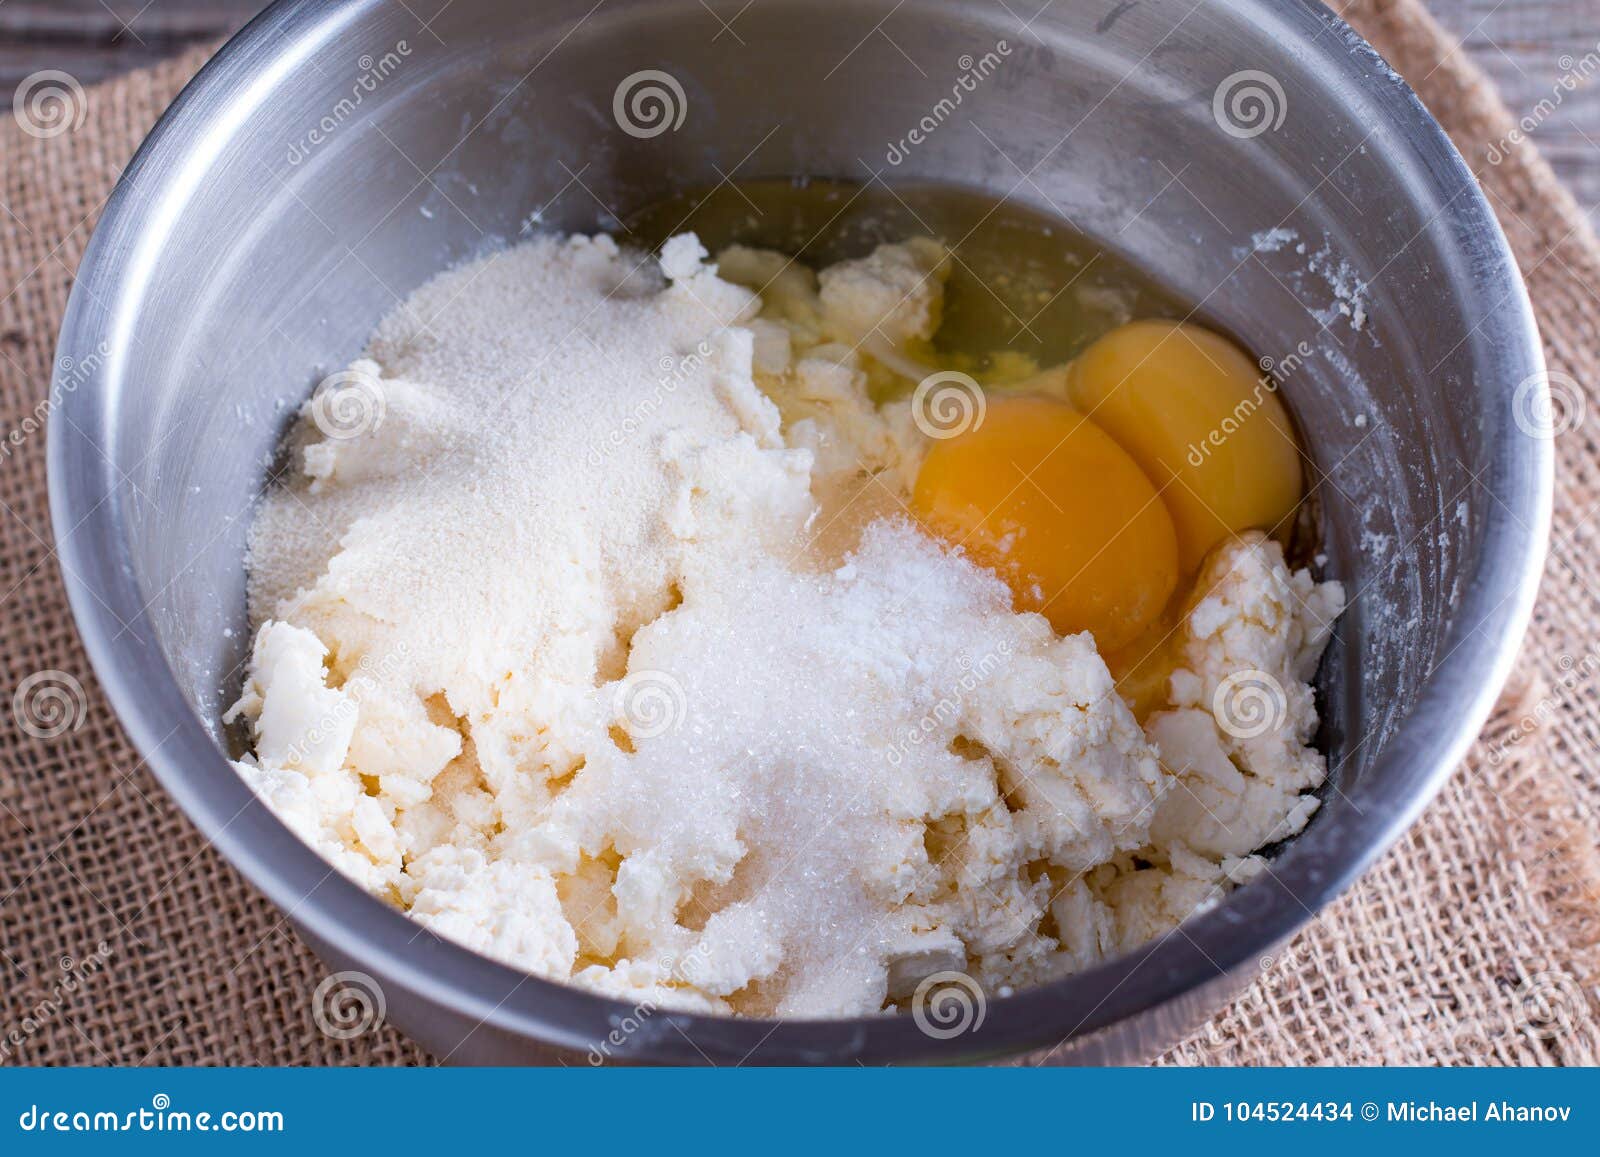 Ingredients For The Preparation Of Cottage Cheese Cottage Cheese